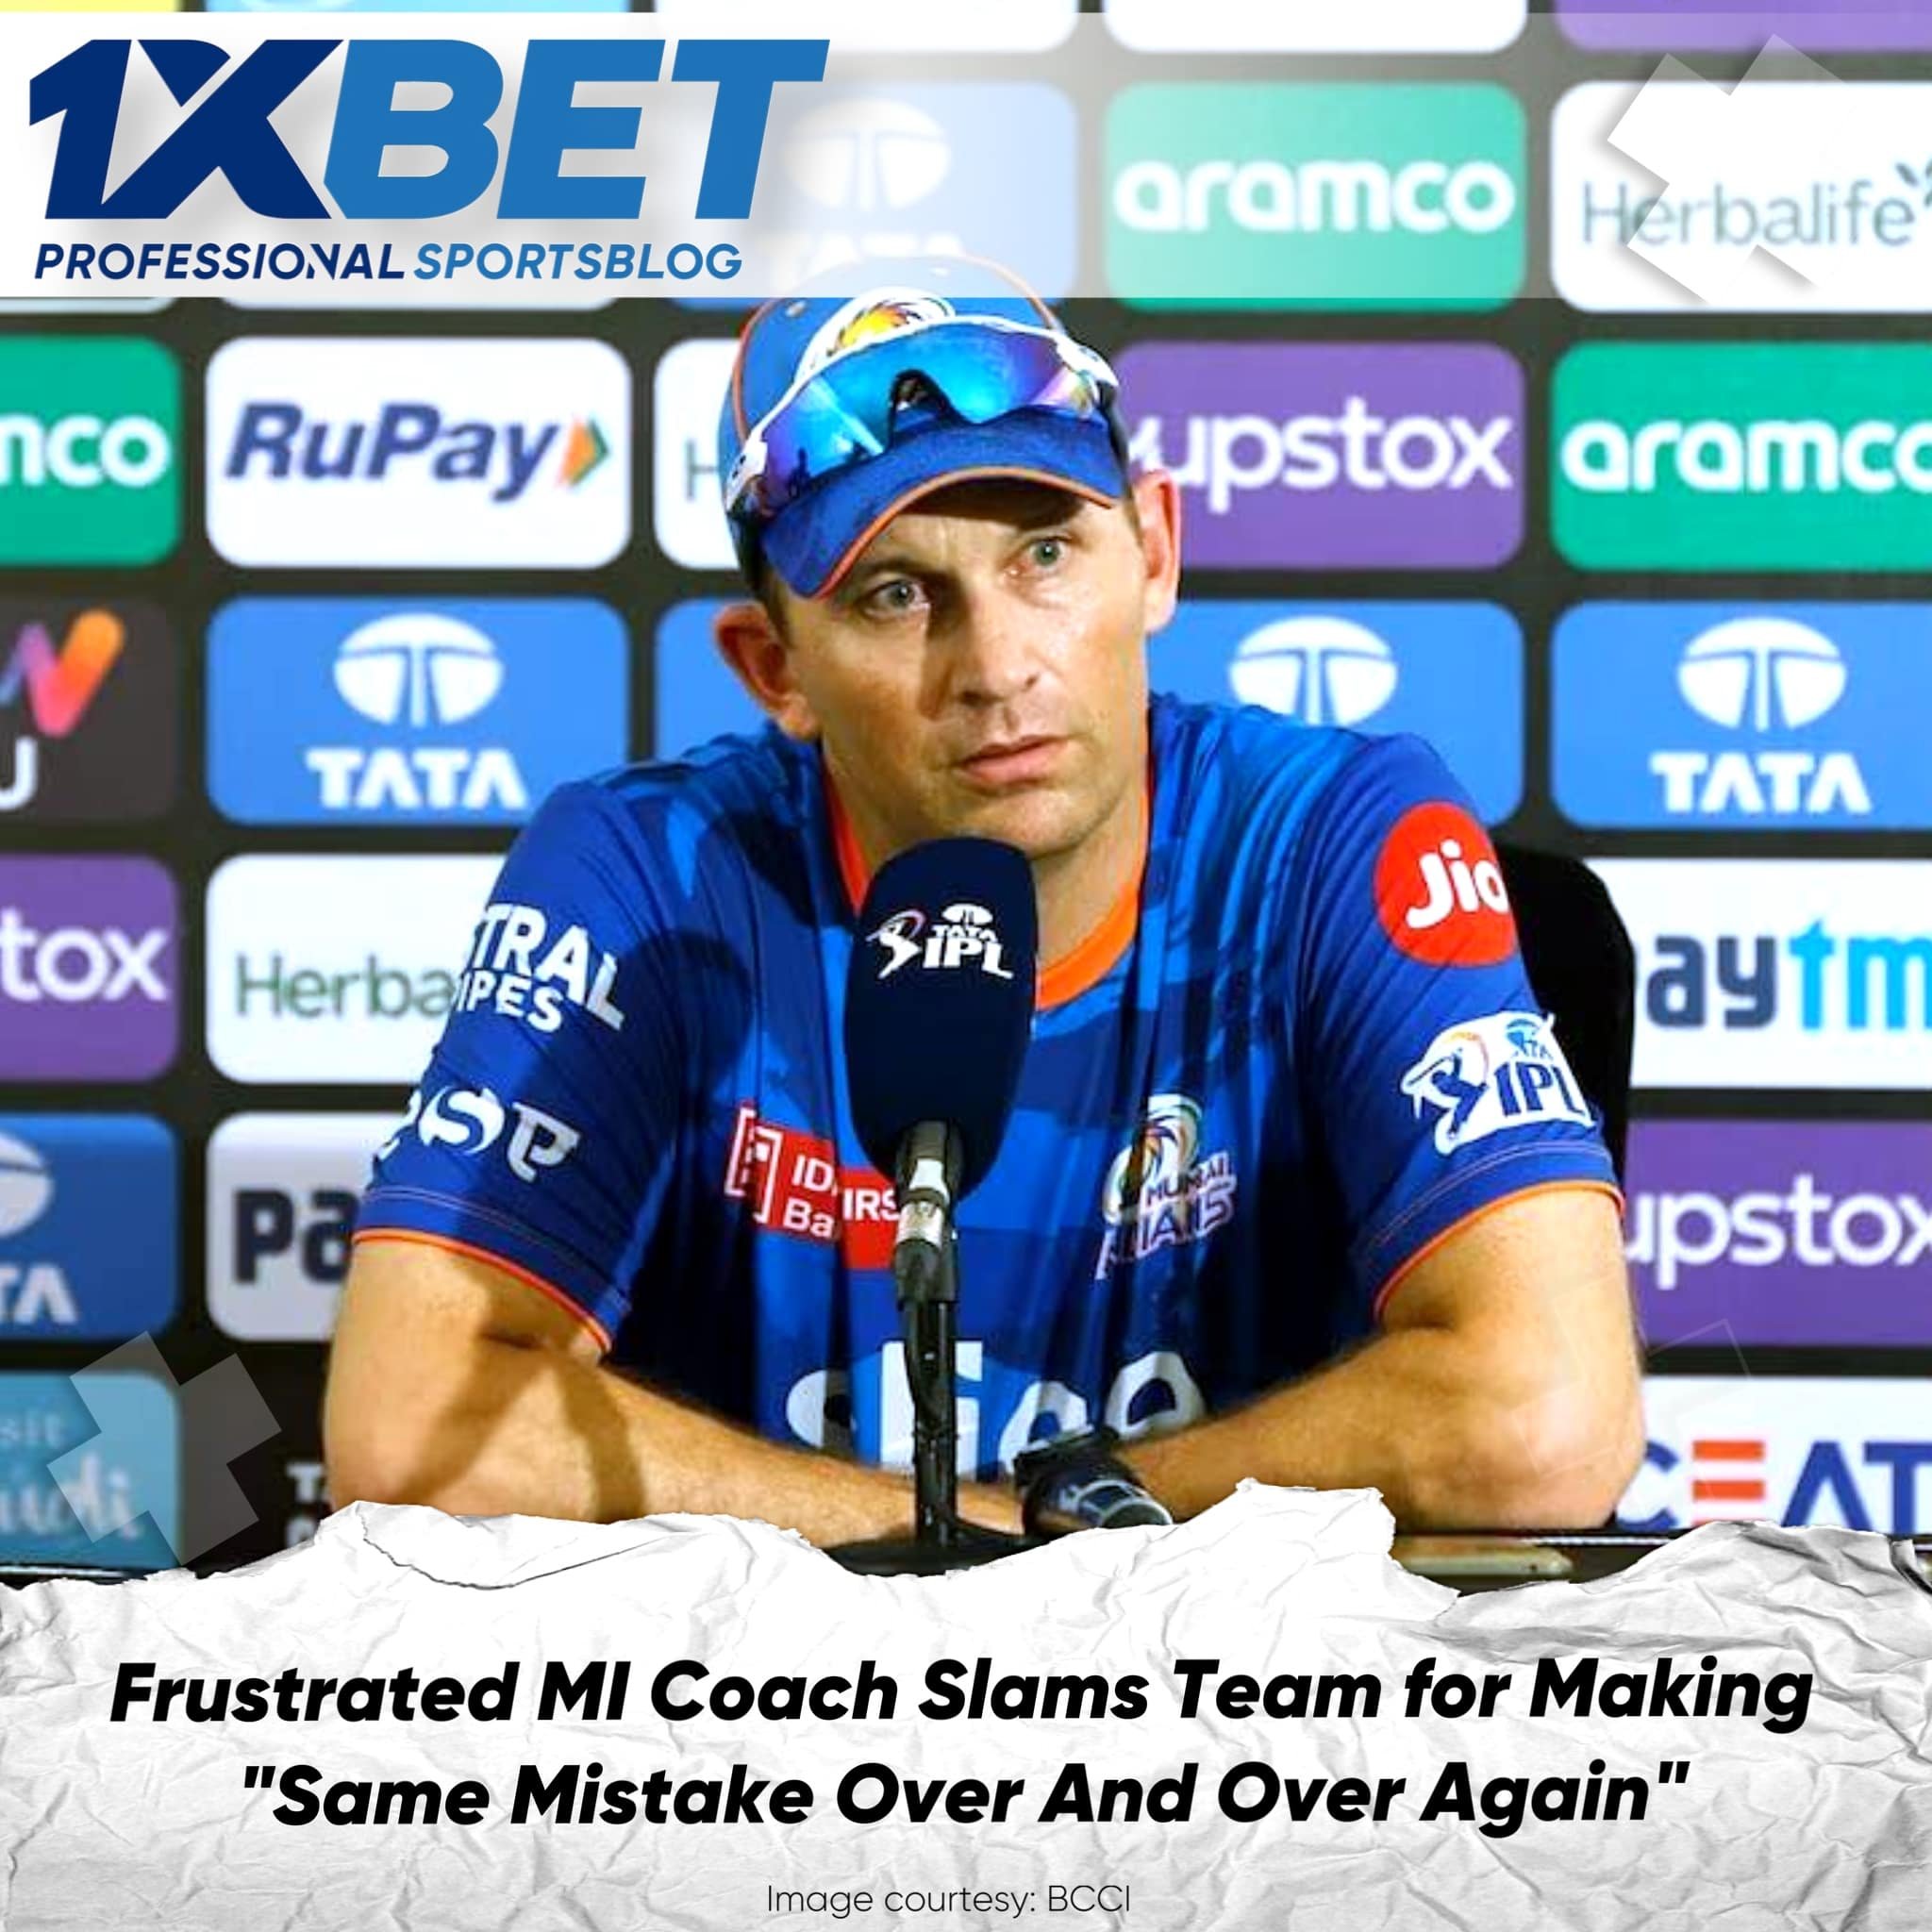 Frustrated MI Coach Slams Team for Making "Same Mistake Over And Over Again"